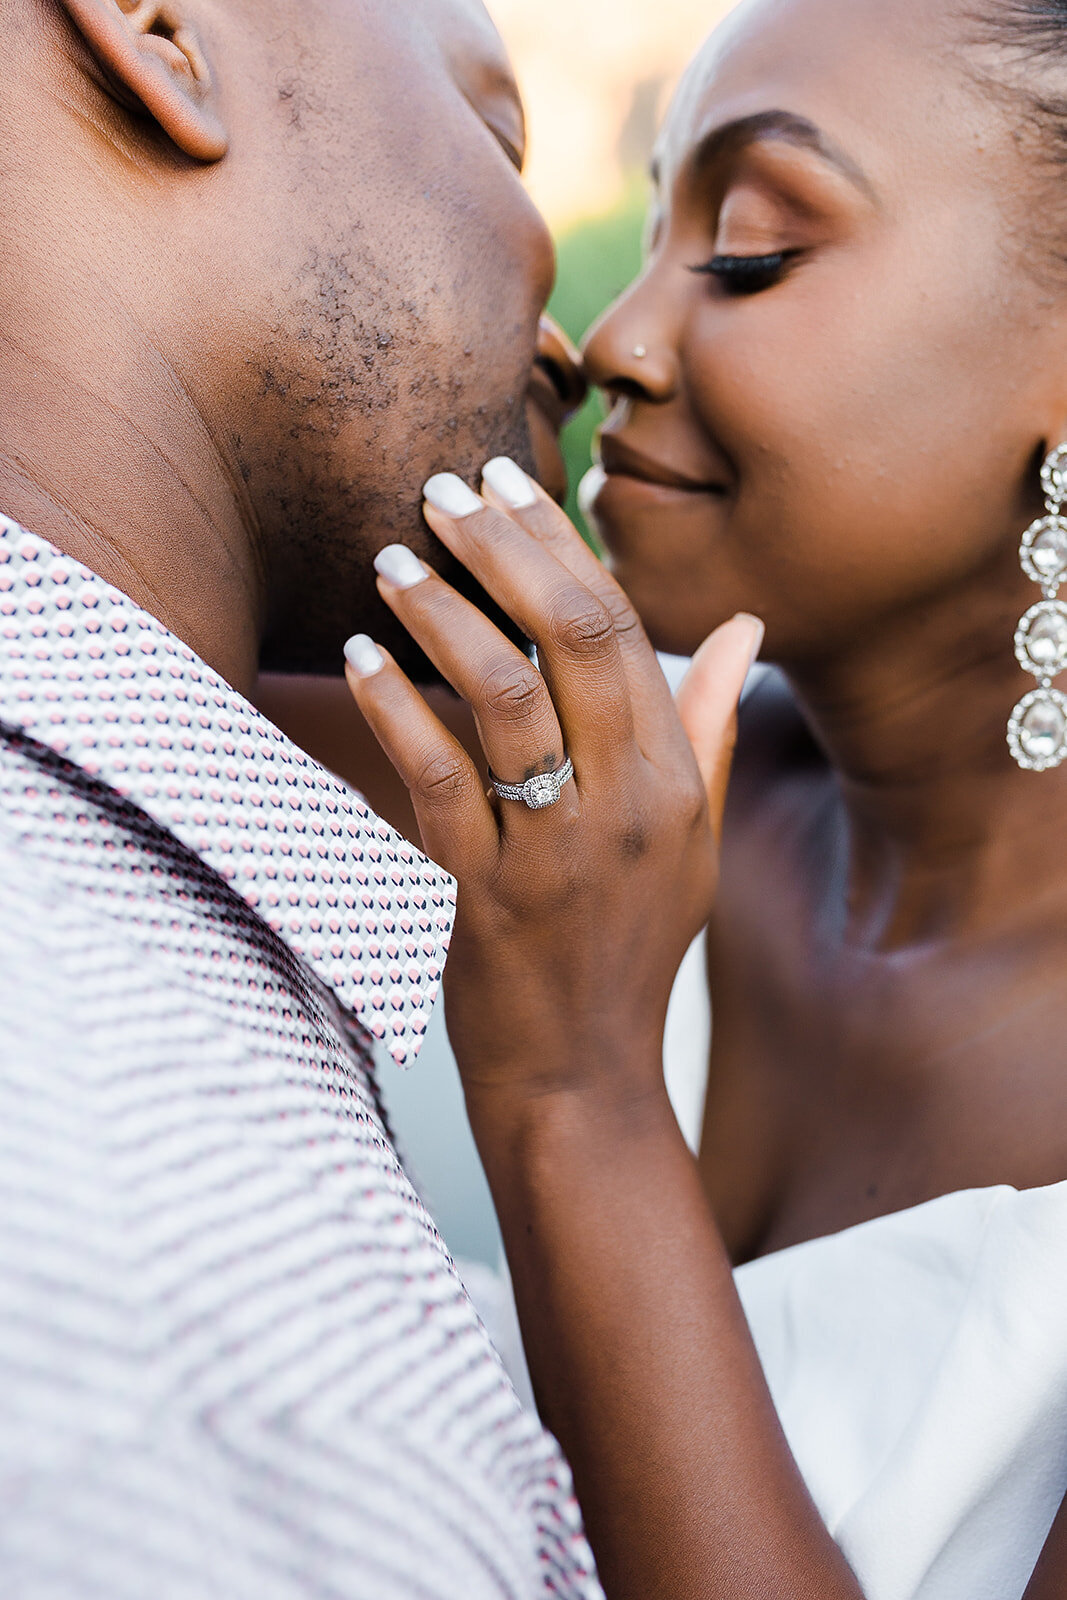 Man and woman kissing with the focus on the engagement ring